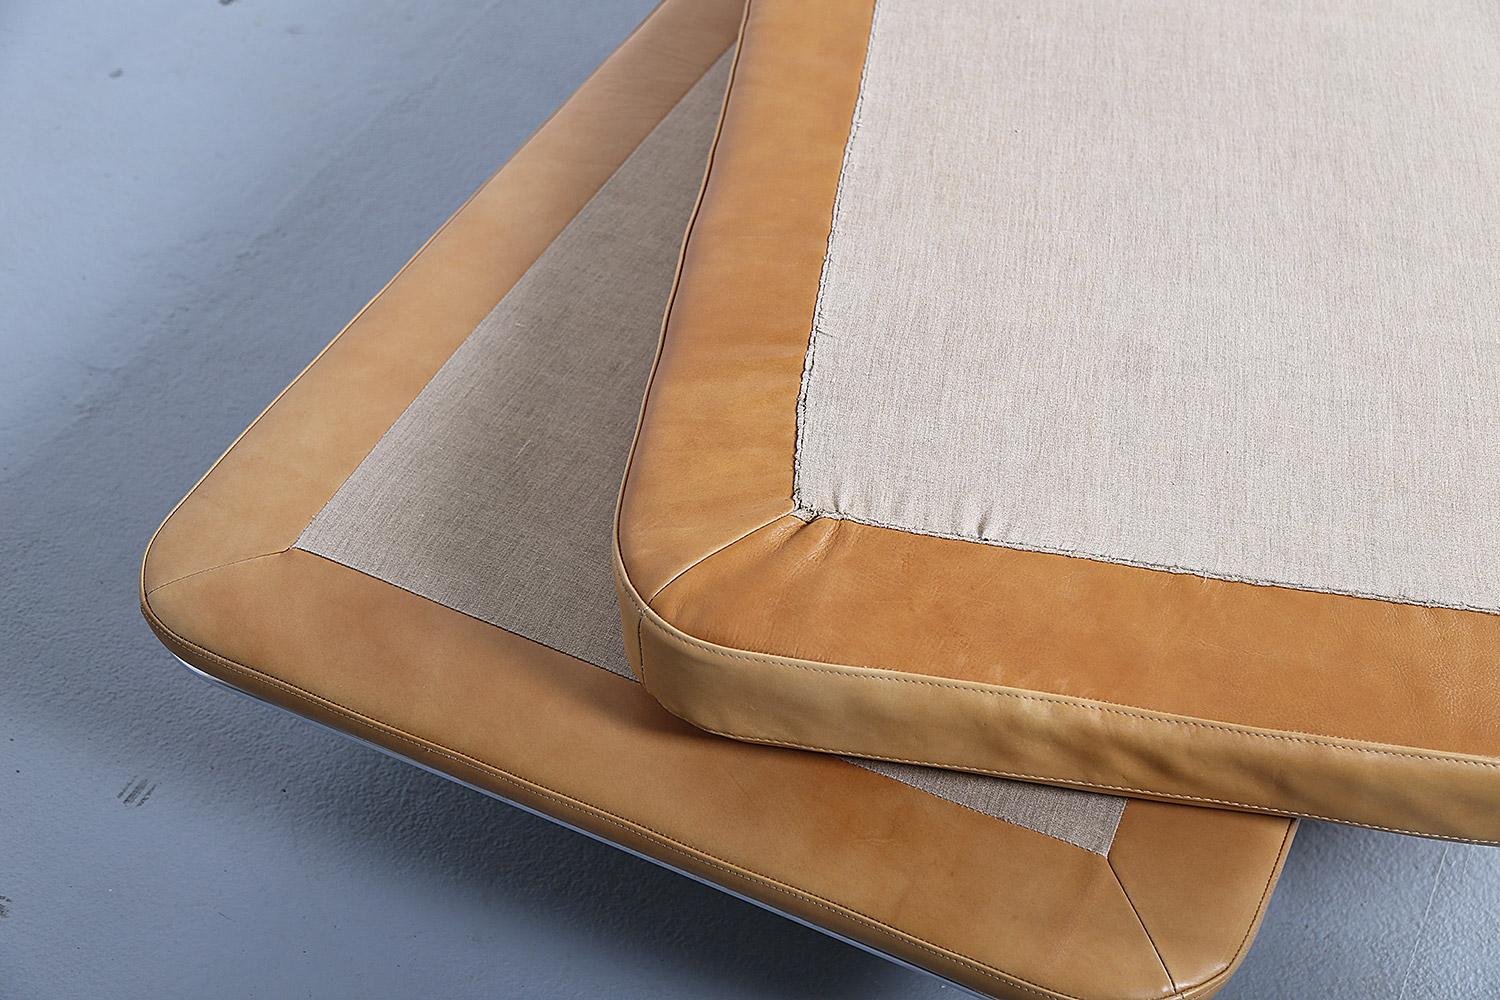 Rare coganc leather daybed (model 6915) incl. matching bolster designed by Horst Brüning for Kill International in the 1960s. Beautiful, Minimalist design with a loose mattress on the metal frame. Covered with linen fabric on the underside.